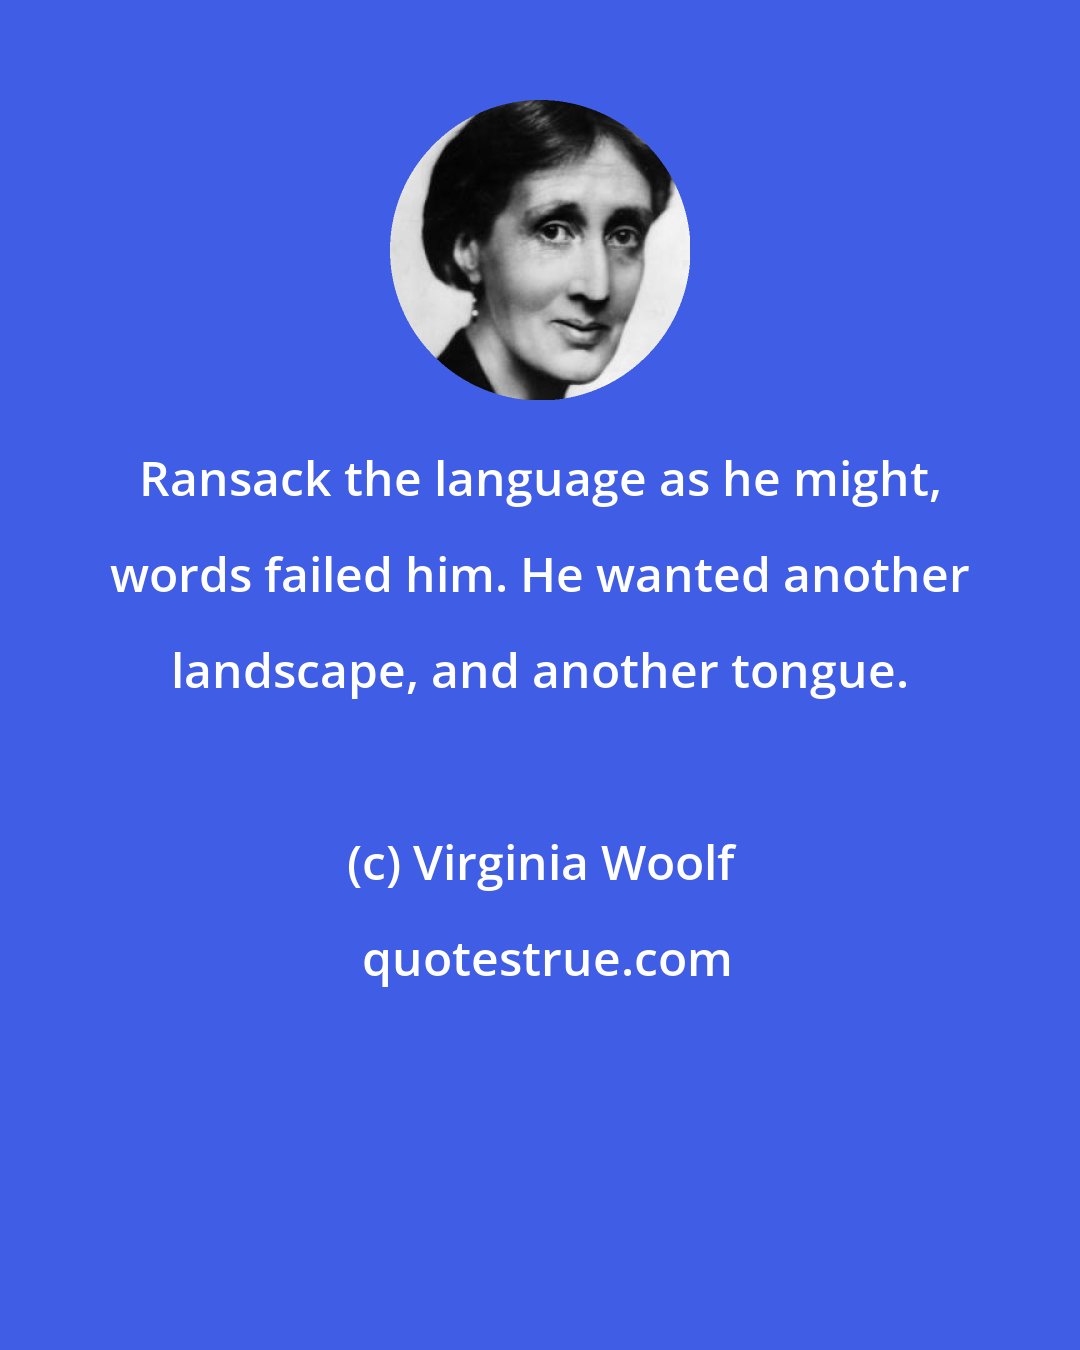 Virginia Woolf: Ransack the language as he might, words failed him. He wanted another landscape, and another tongue.